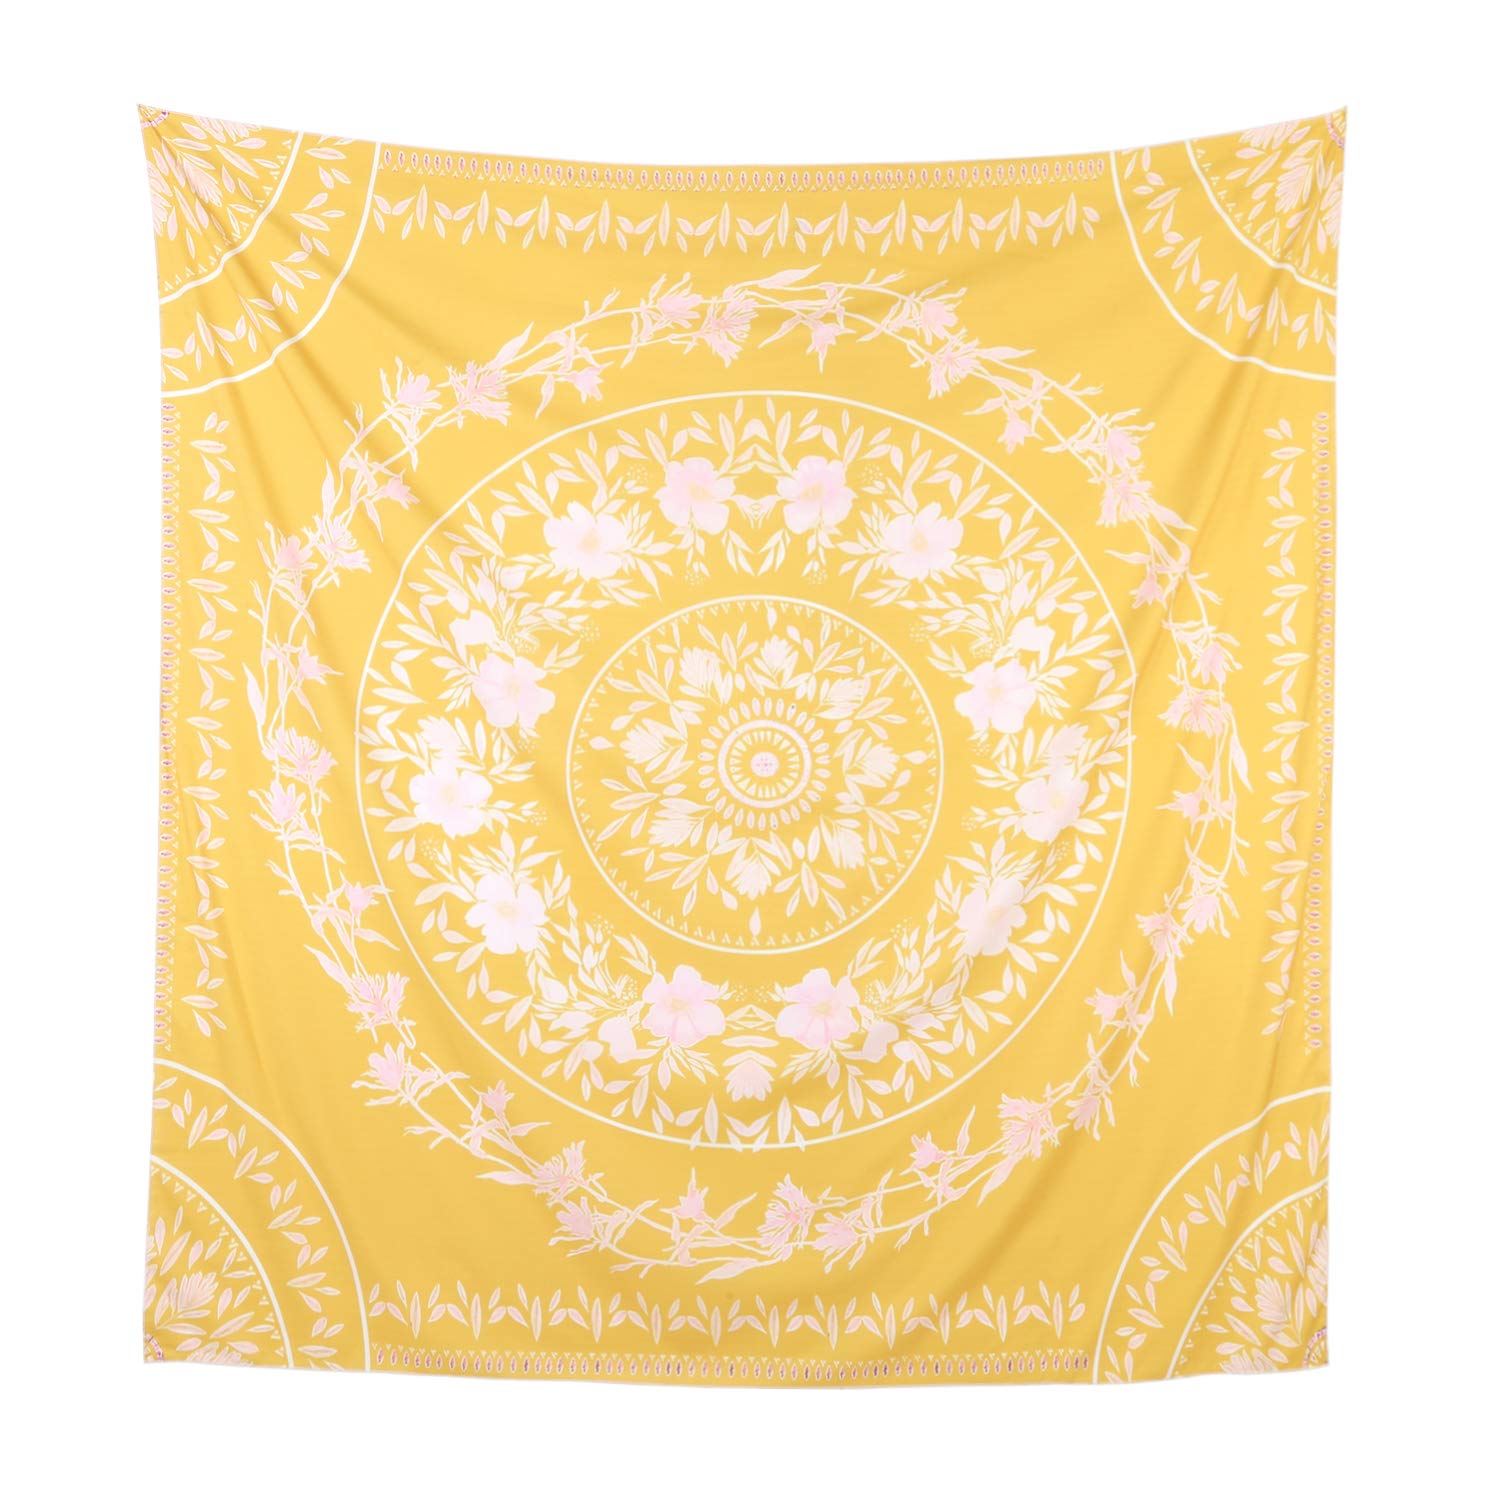 Book Cover Simpkeely Sketched Floral Medallion Tapestry, India Yellow Wall Art Mandala Bohemian Hippie Wall Hanging Tapestries for Dorm Home Decoration 59